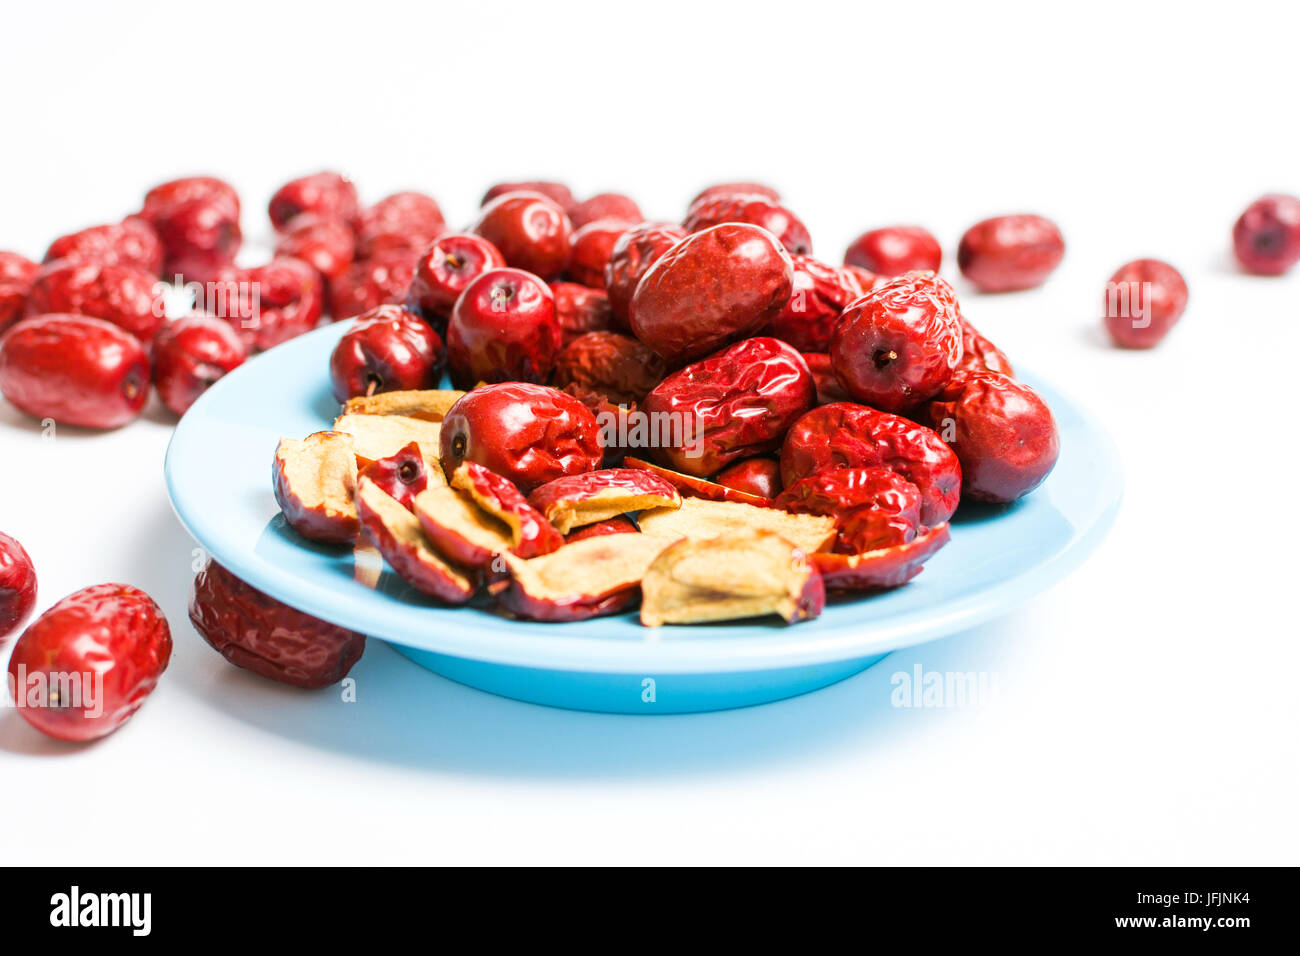 Jujube, Chinese dried red date fruit on a plate isolated Stock Photo